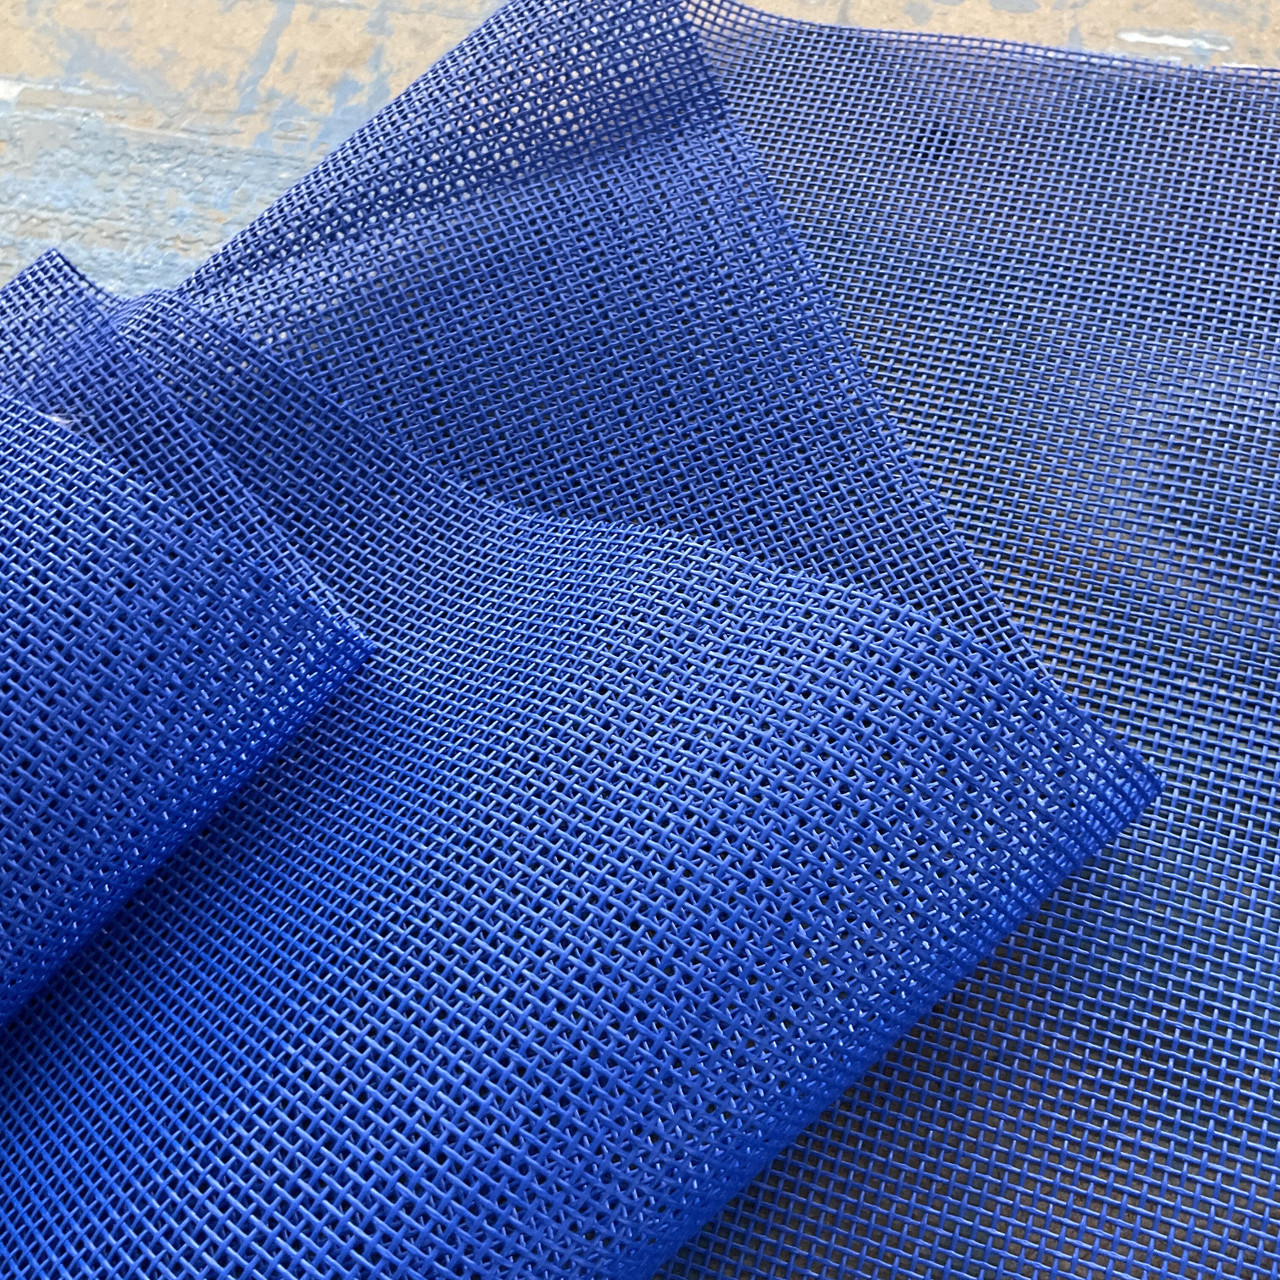 Hex Mesh, 61 W Blue, Wholesale, By The Yard Or Roll, Canvas ETC.